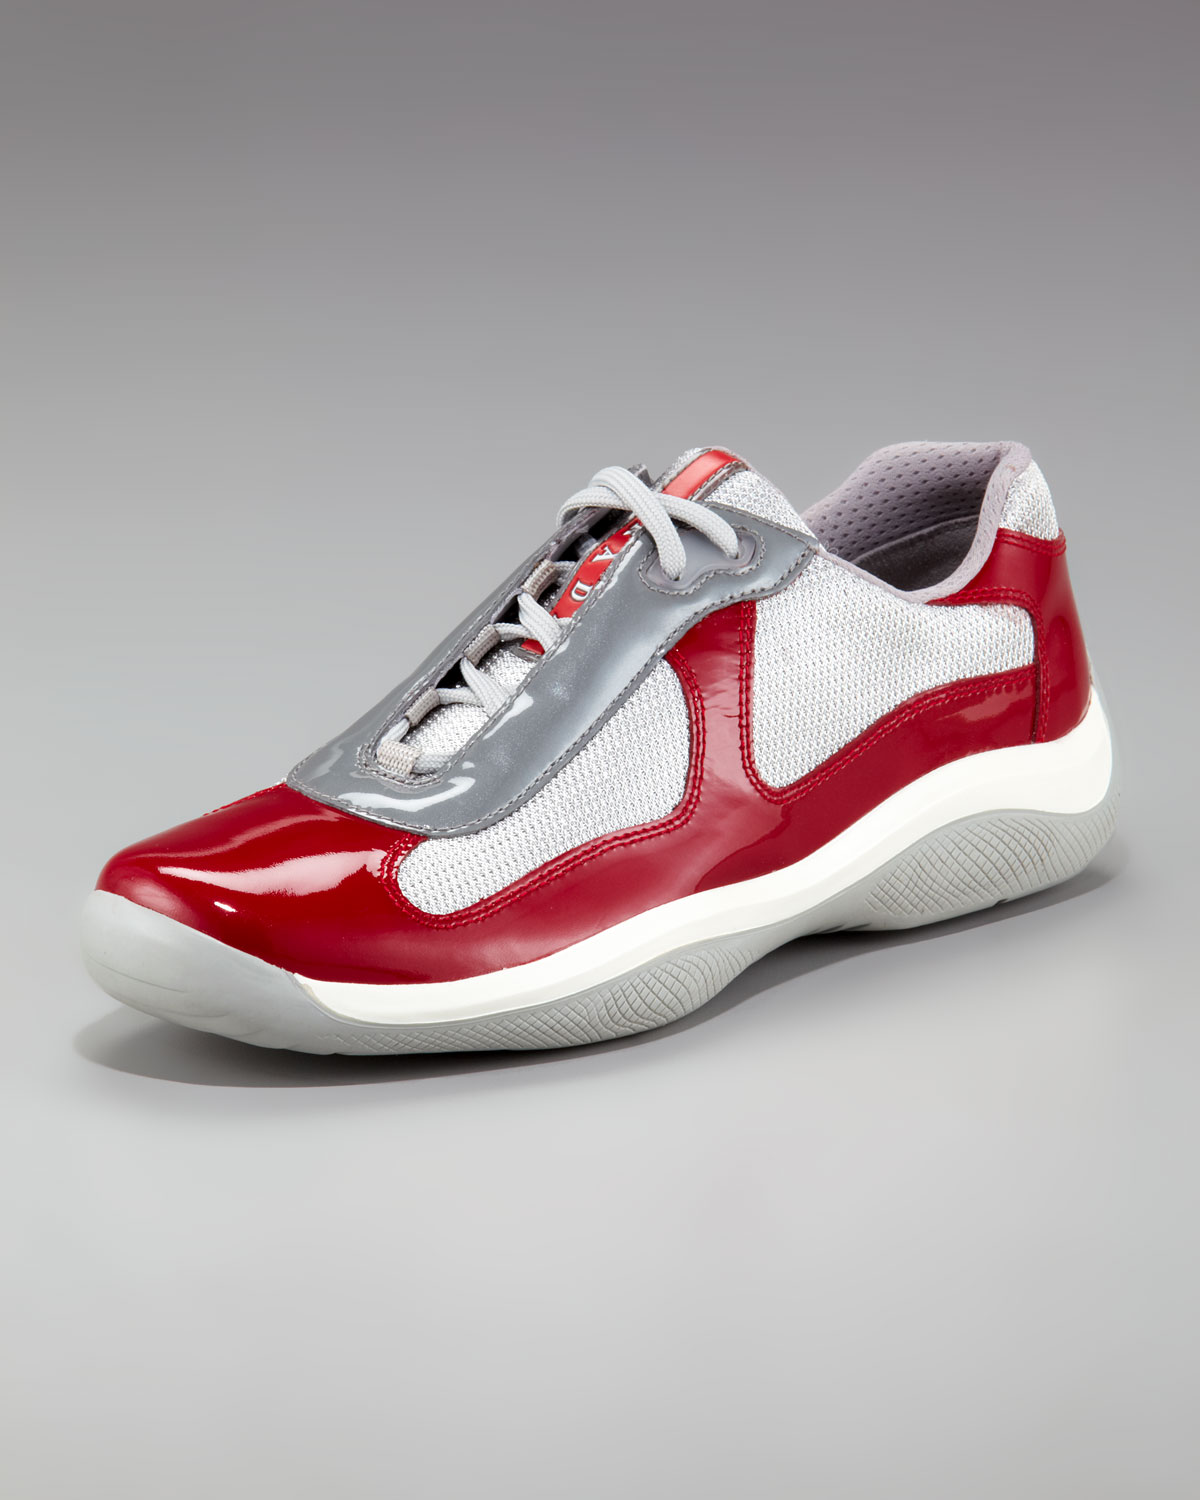 Lyst - Prada Patent-leather Sneaker in Red for Men